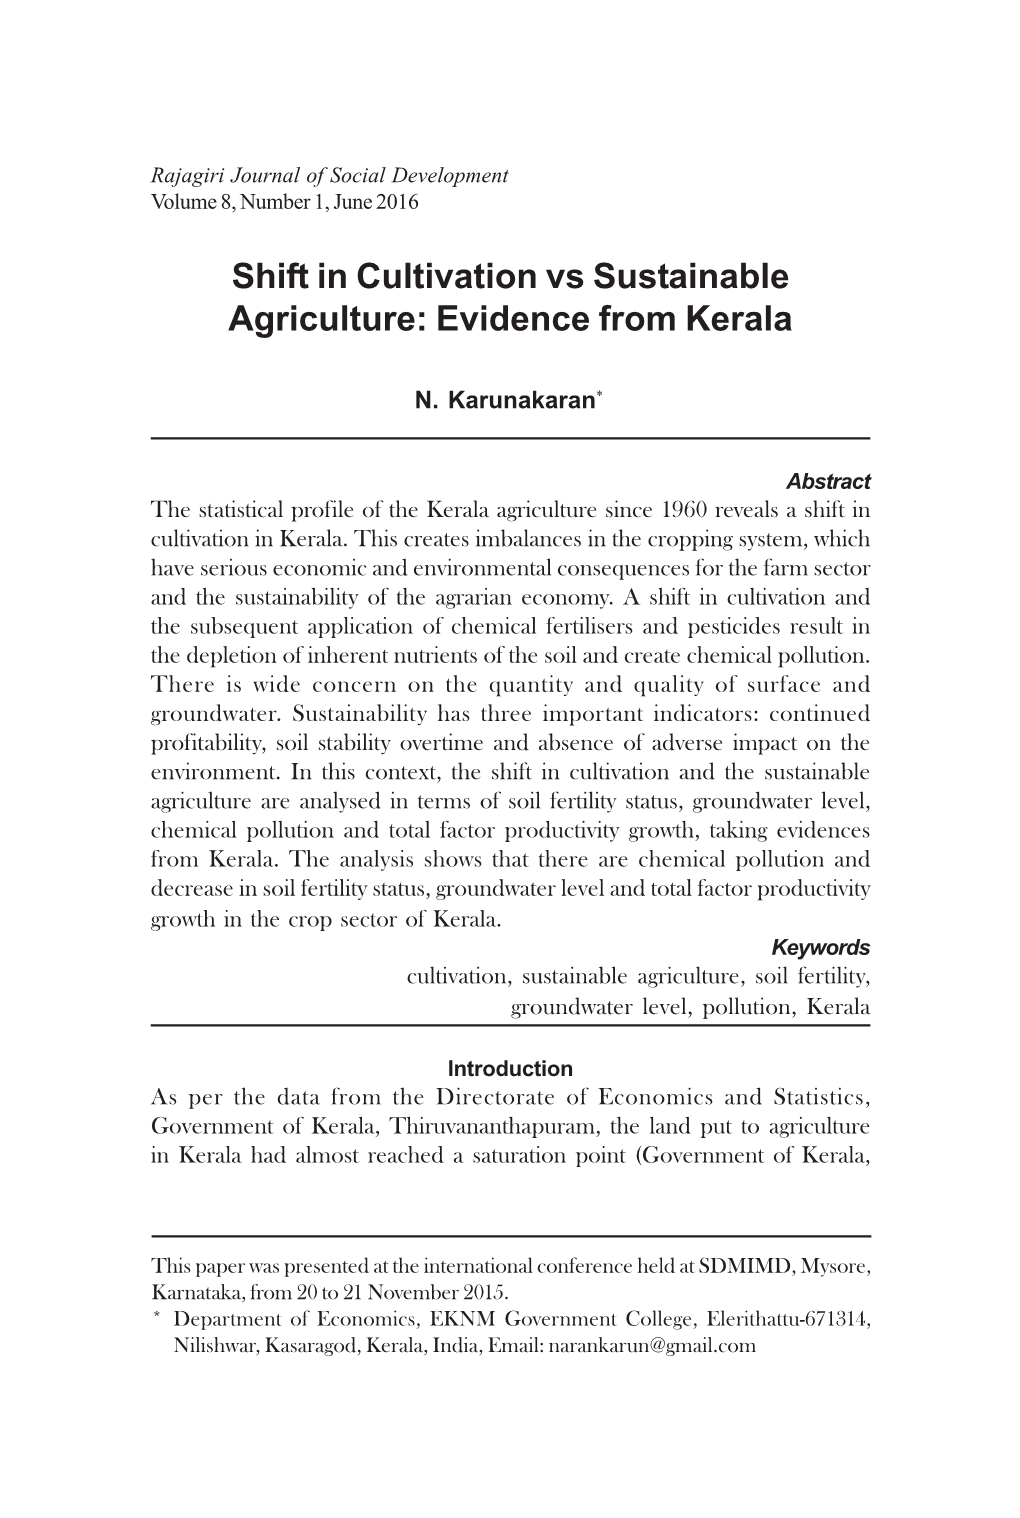 Shift in Cultivation Vs Sustainable Agriculture: Evidence from Kerala